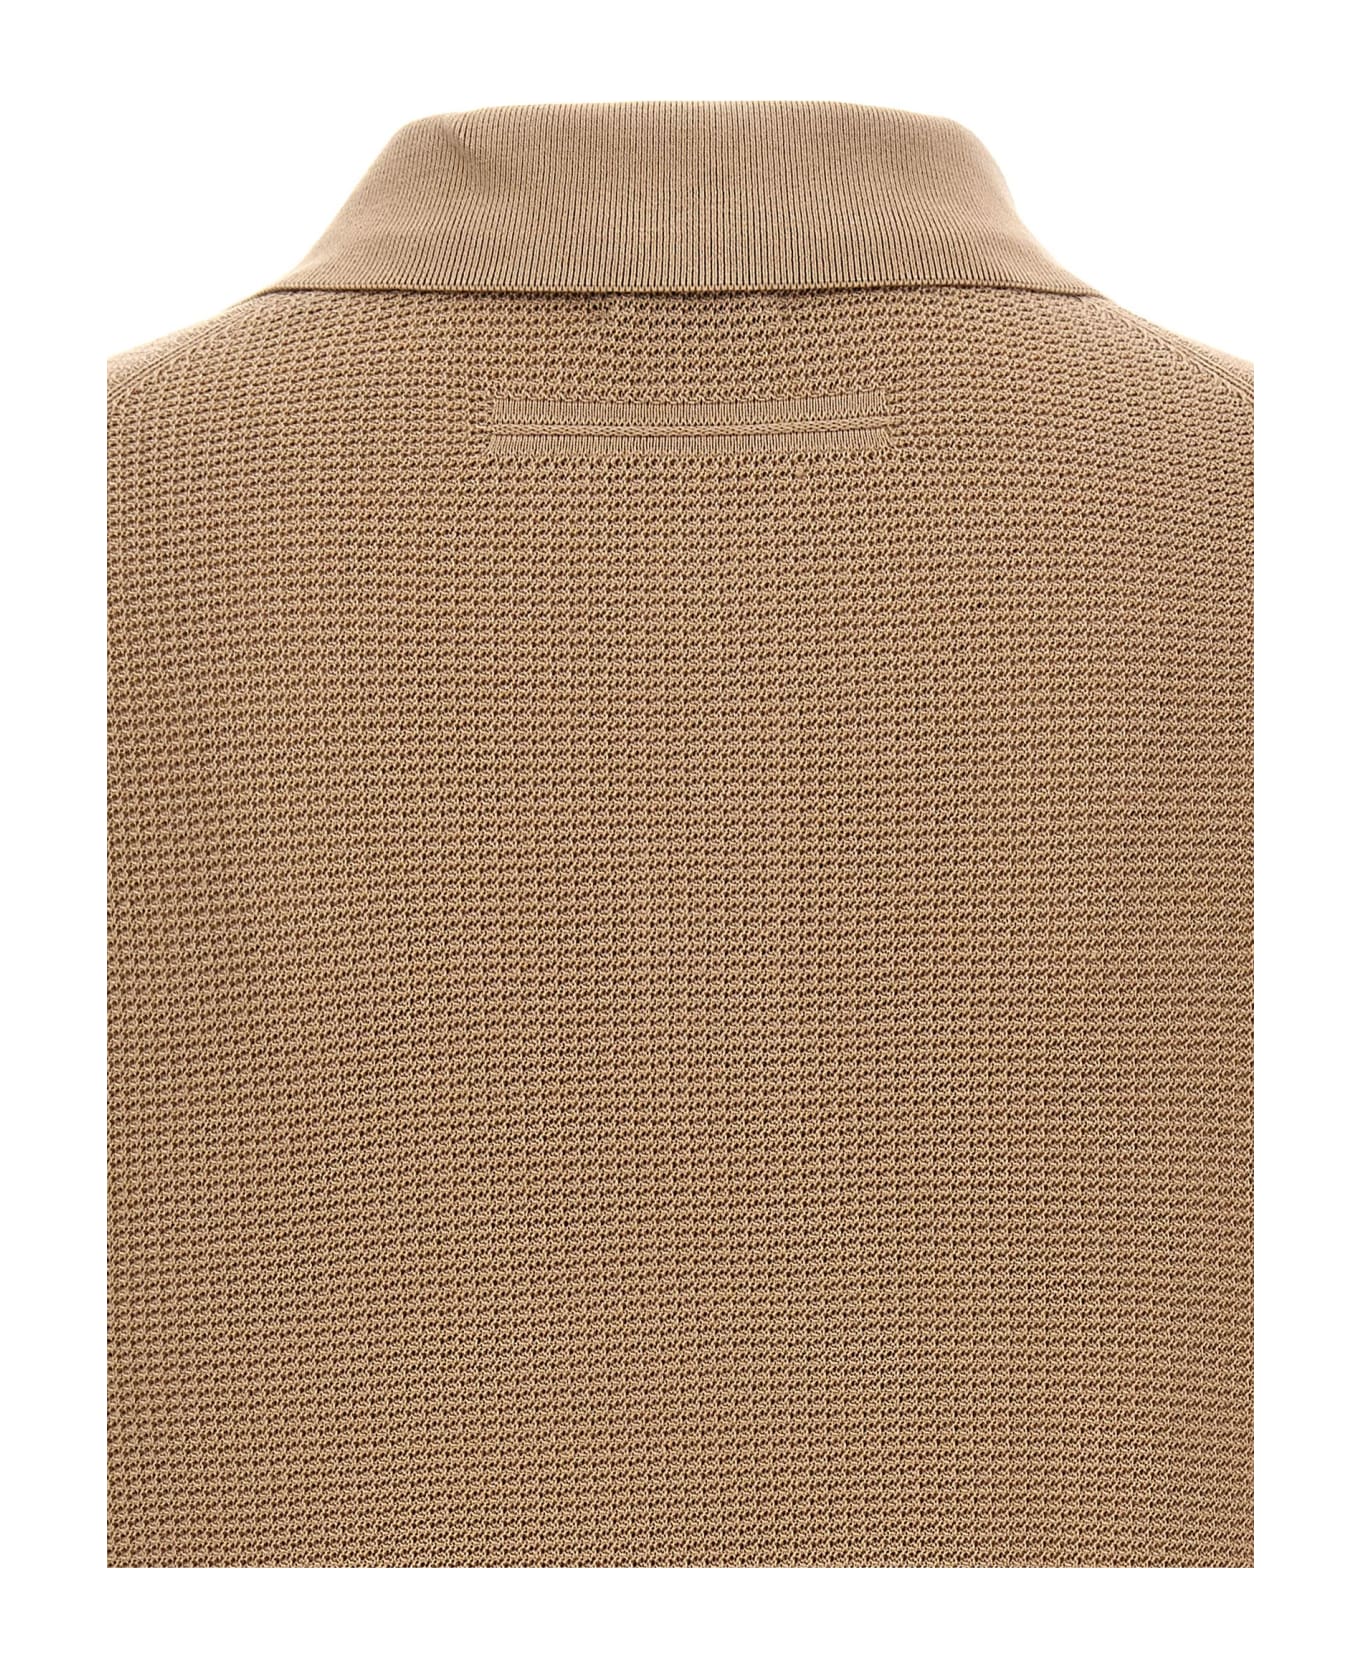 Zegna Knitted Polo Shirt - Beige